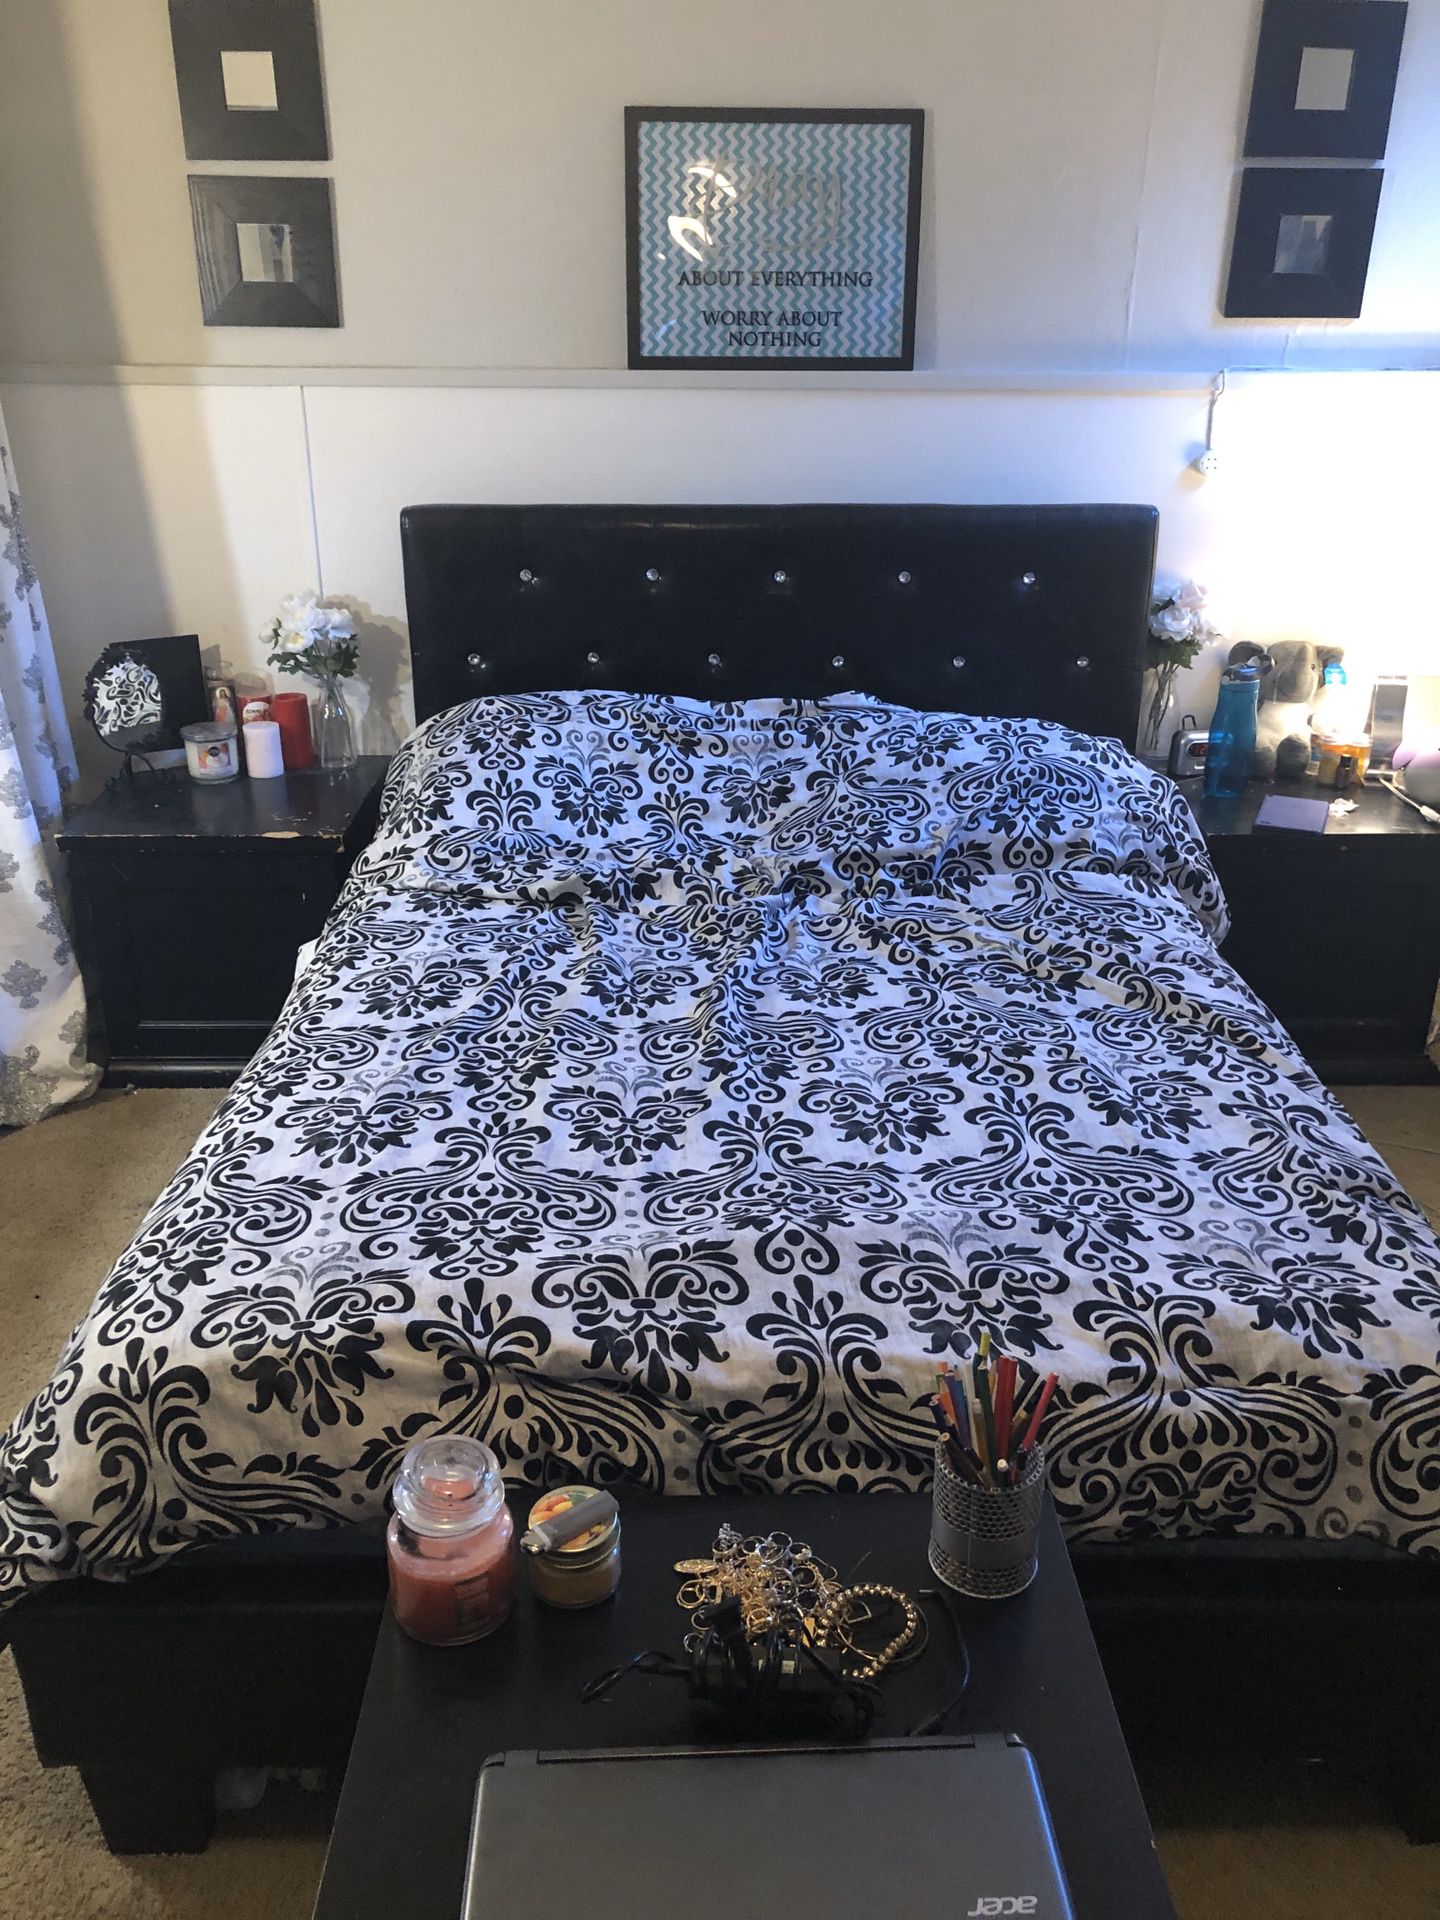 Full size bed frame (mattress not included)